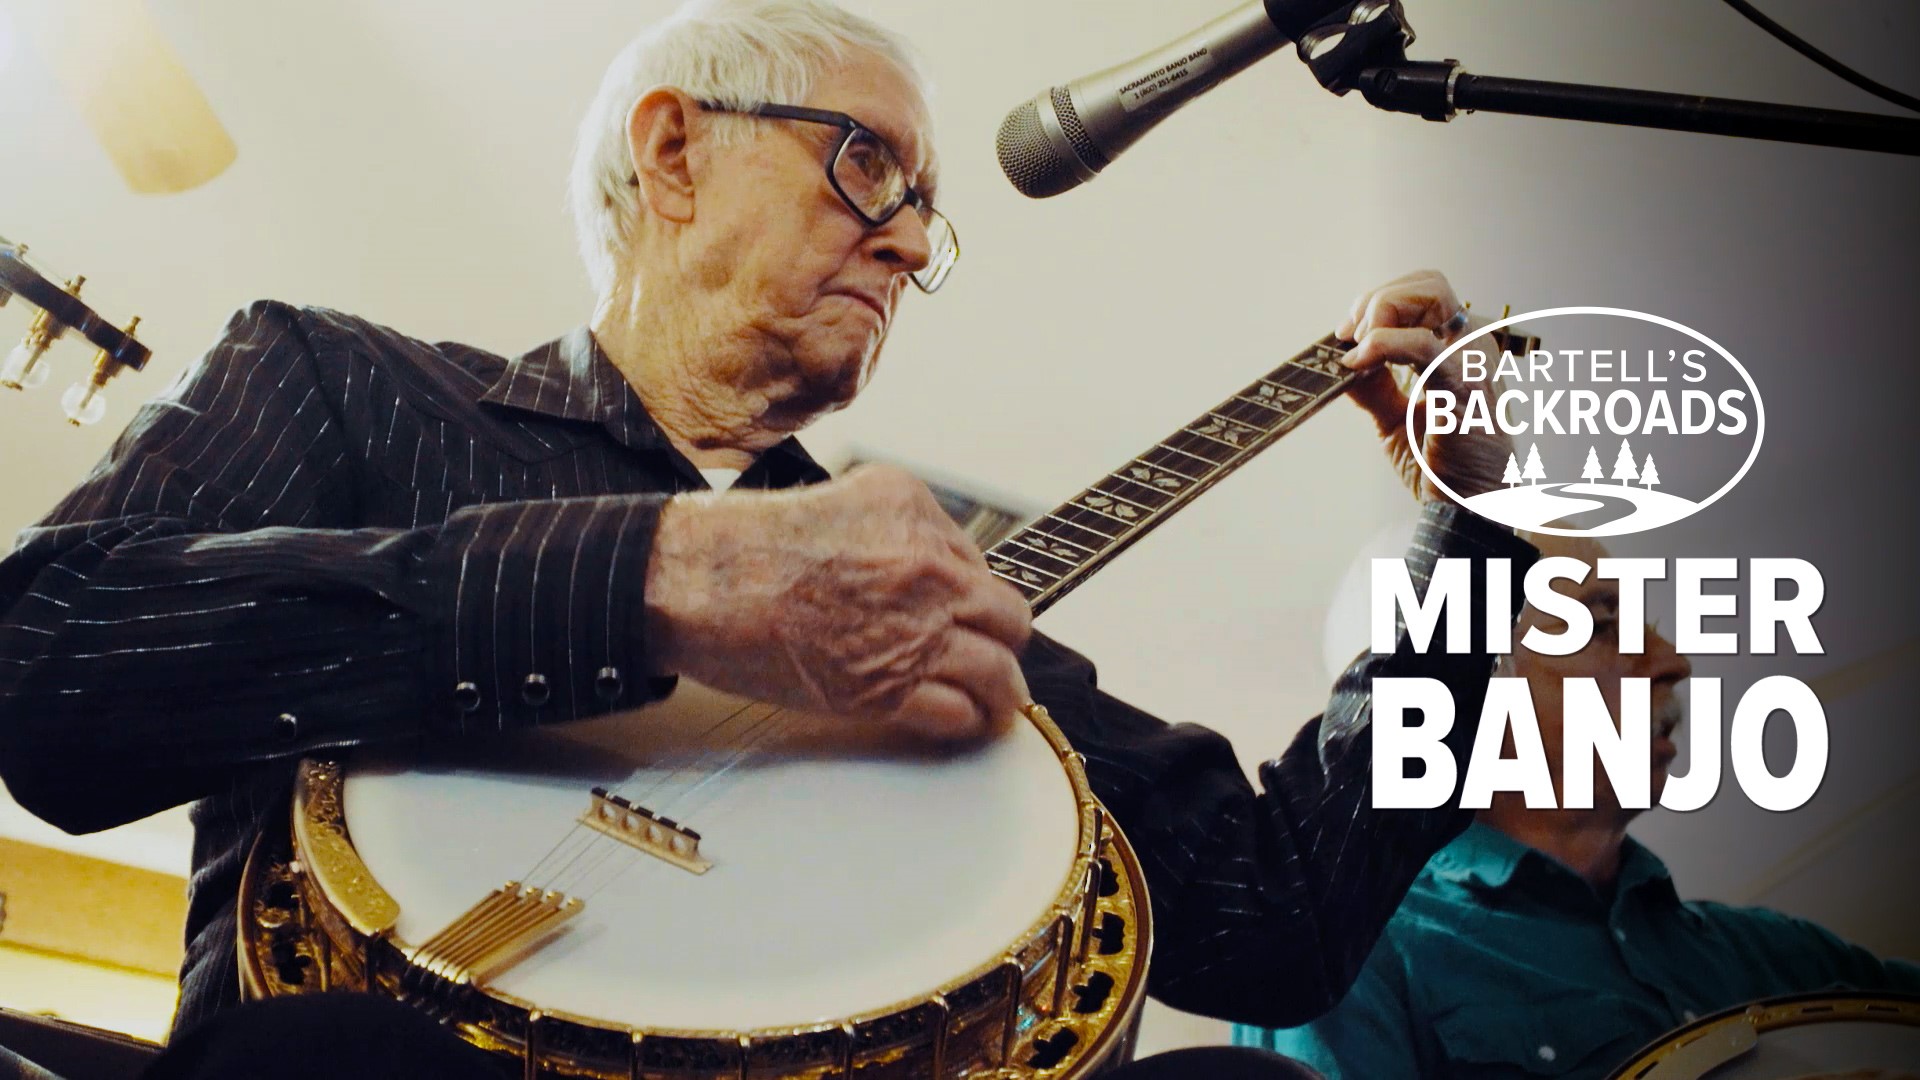 John Green is 91 and retired, but he still plays a mean four-string. John Bartell gets a free concert at a pizza shop, and learns about NorCal's longtime banjo tradition.